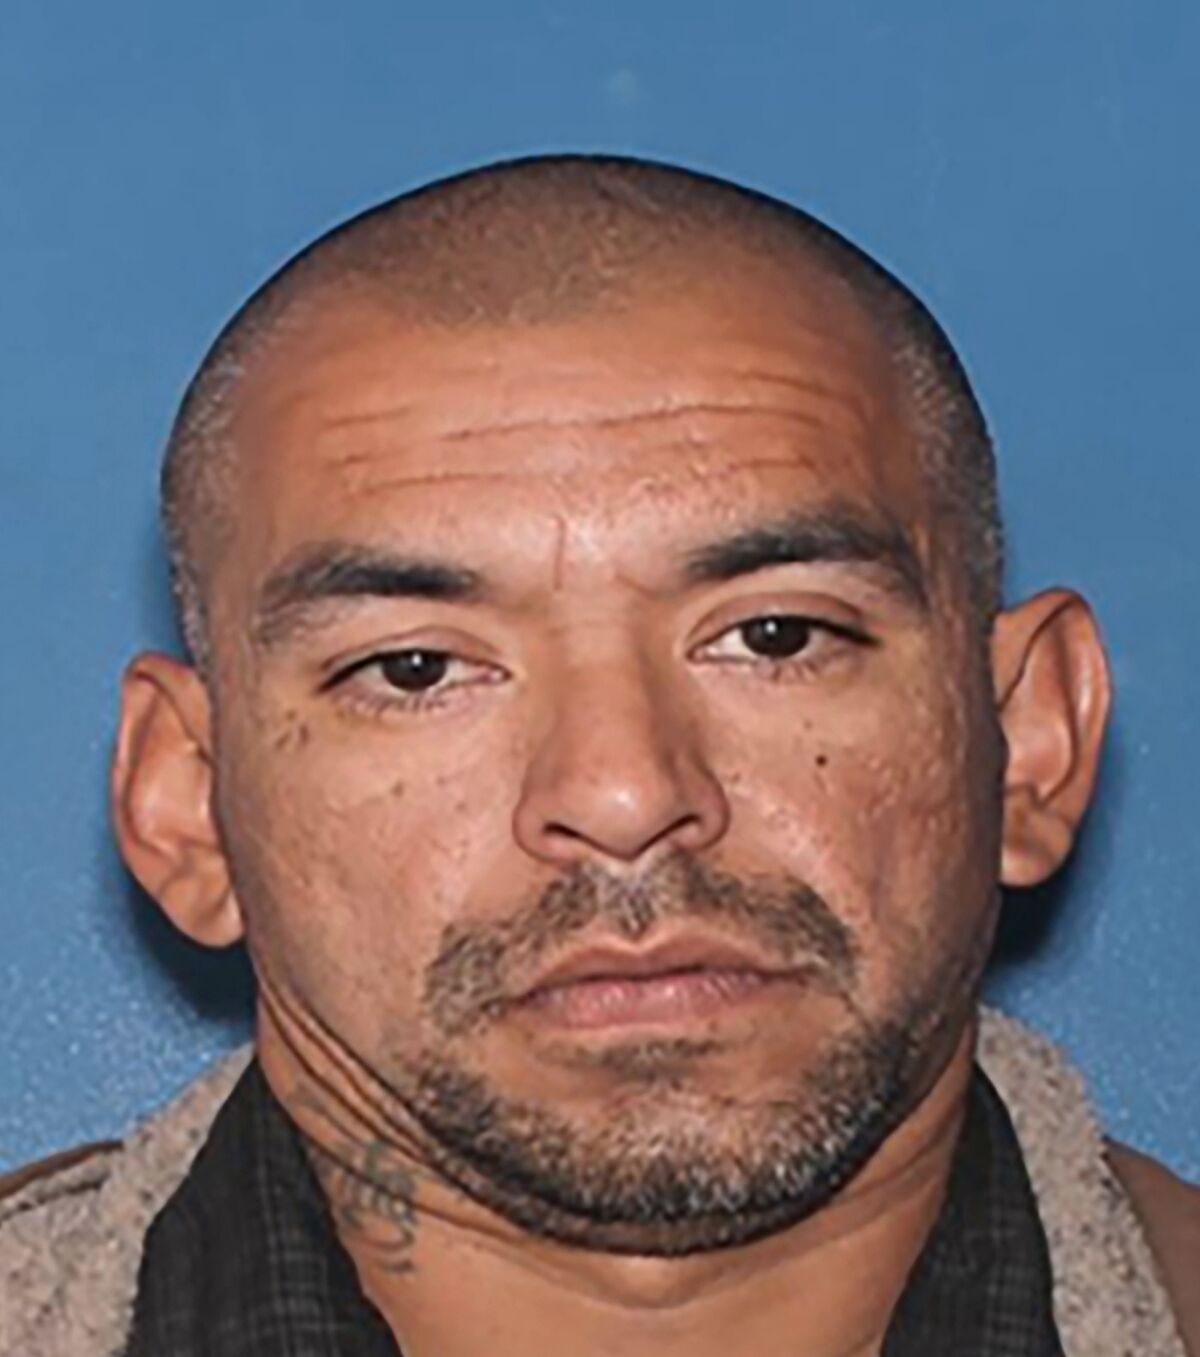 This undated photo provided by the FBI shows Valentin Rodriguez, who is charged with assault in the shooting of a police officer for the Yavapai-Apache Nation in Camp Verde, Ariz. A body found in the Verde River is believed to be a suspect in the shooting of an officer, said police in central Arizona. The body has not yet been formally identified but personal items show the man may be Valentin Rodriguez, 39, said the Yavapai County Sheriff's Office and Yavapai-Apache Nation Police Department in a Friday, Feb. 25, 2022 statement. (FBI via AP)